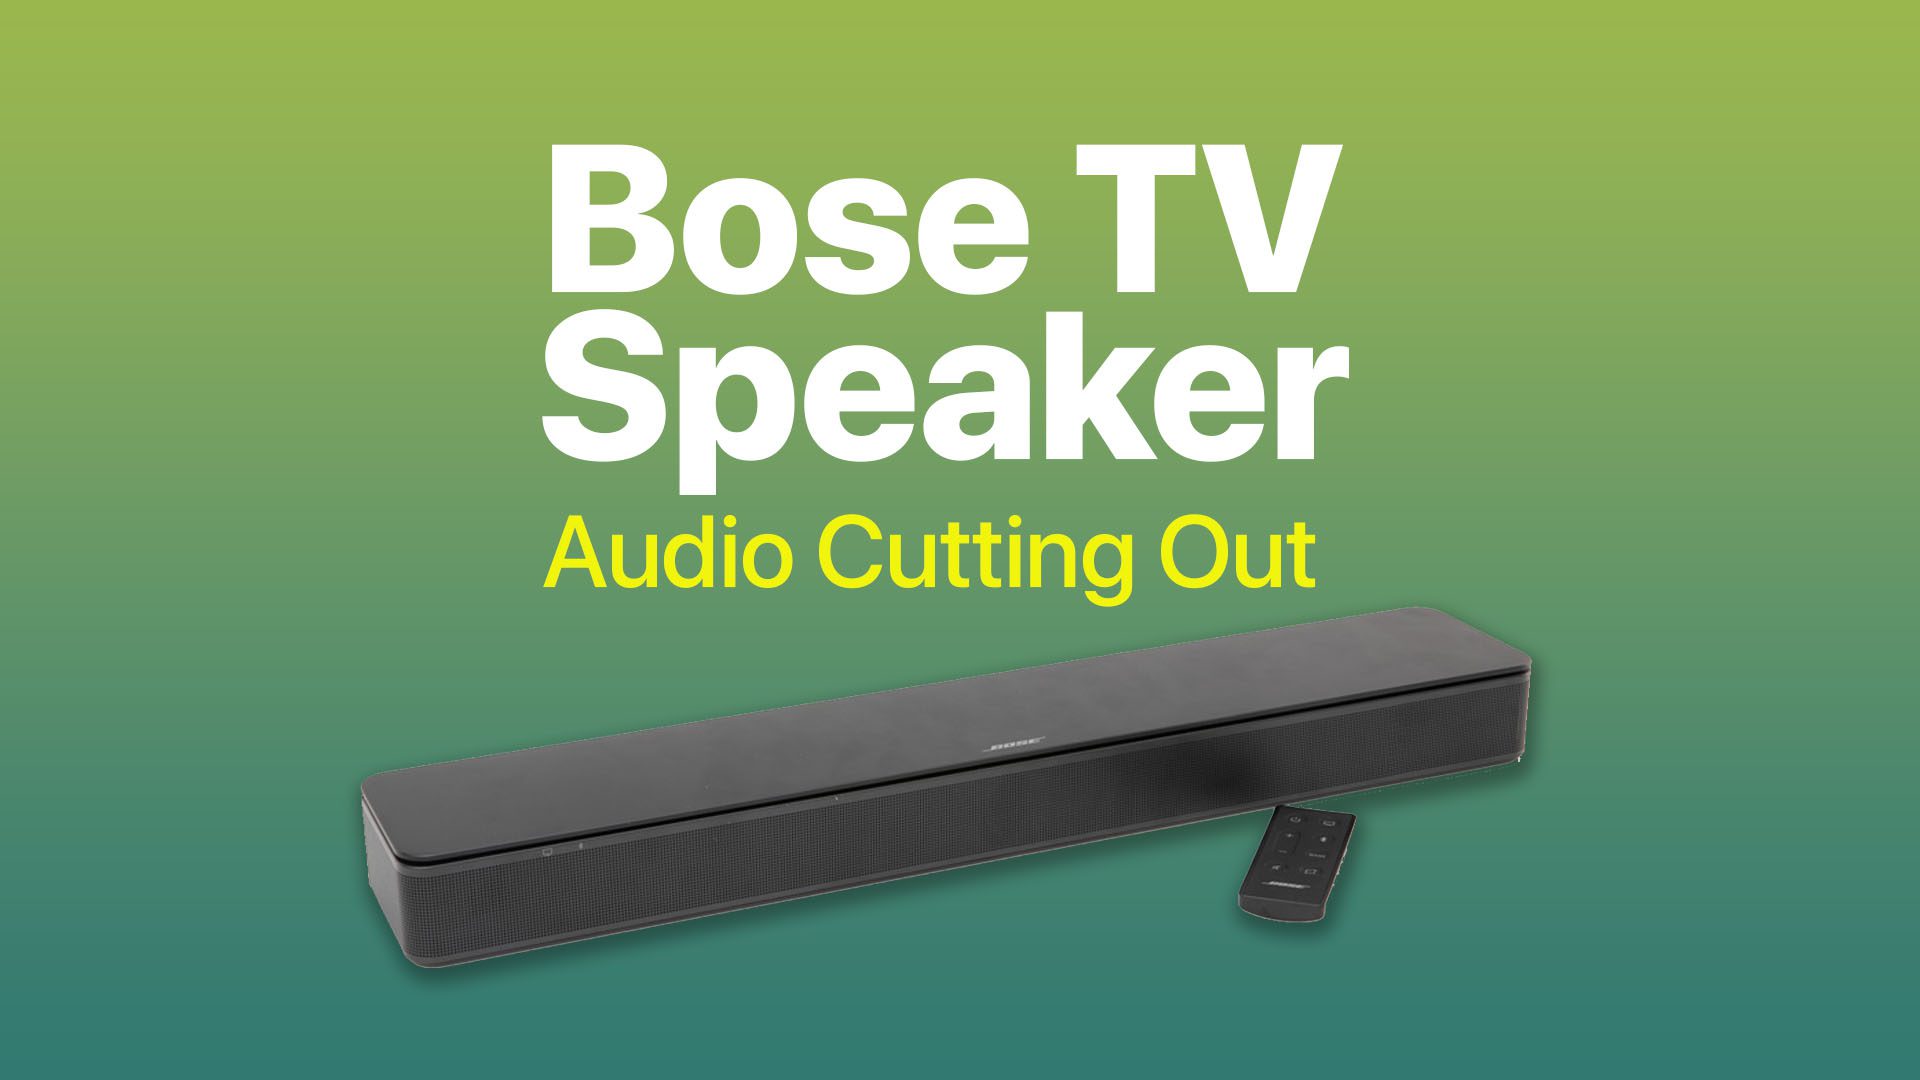 bose tv speaker audio cutting out